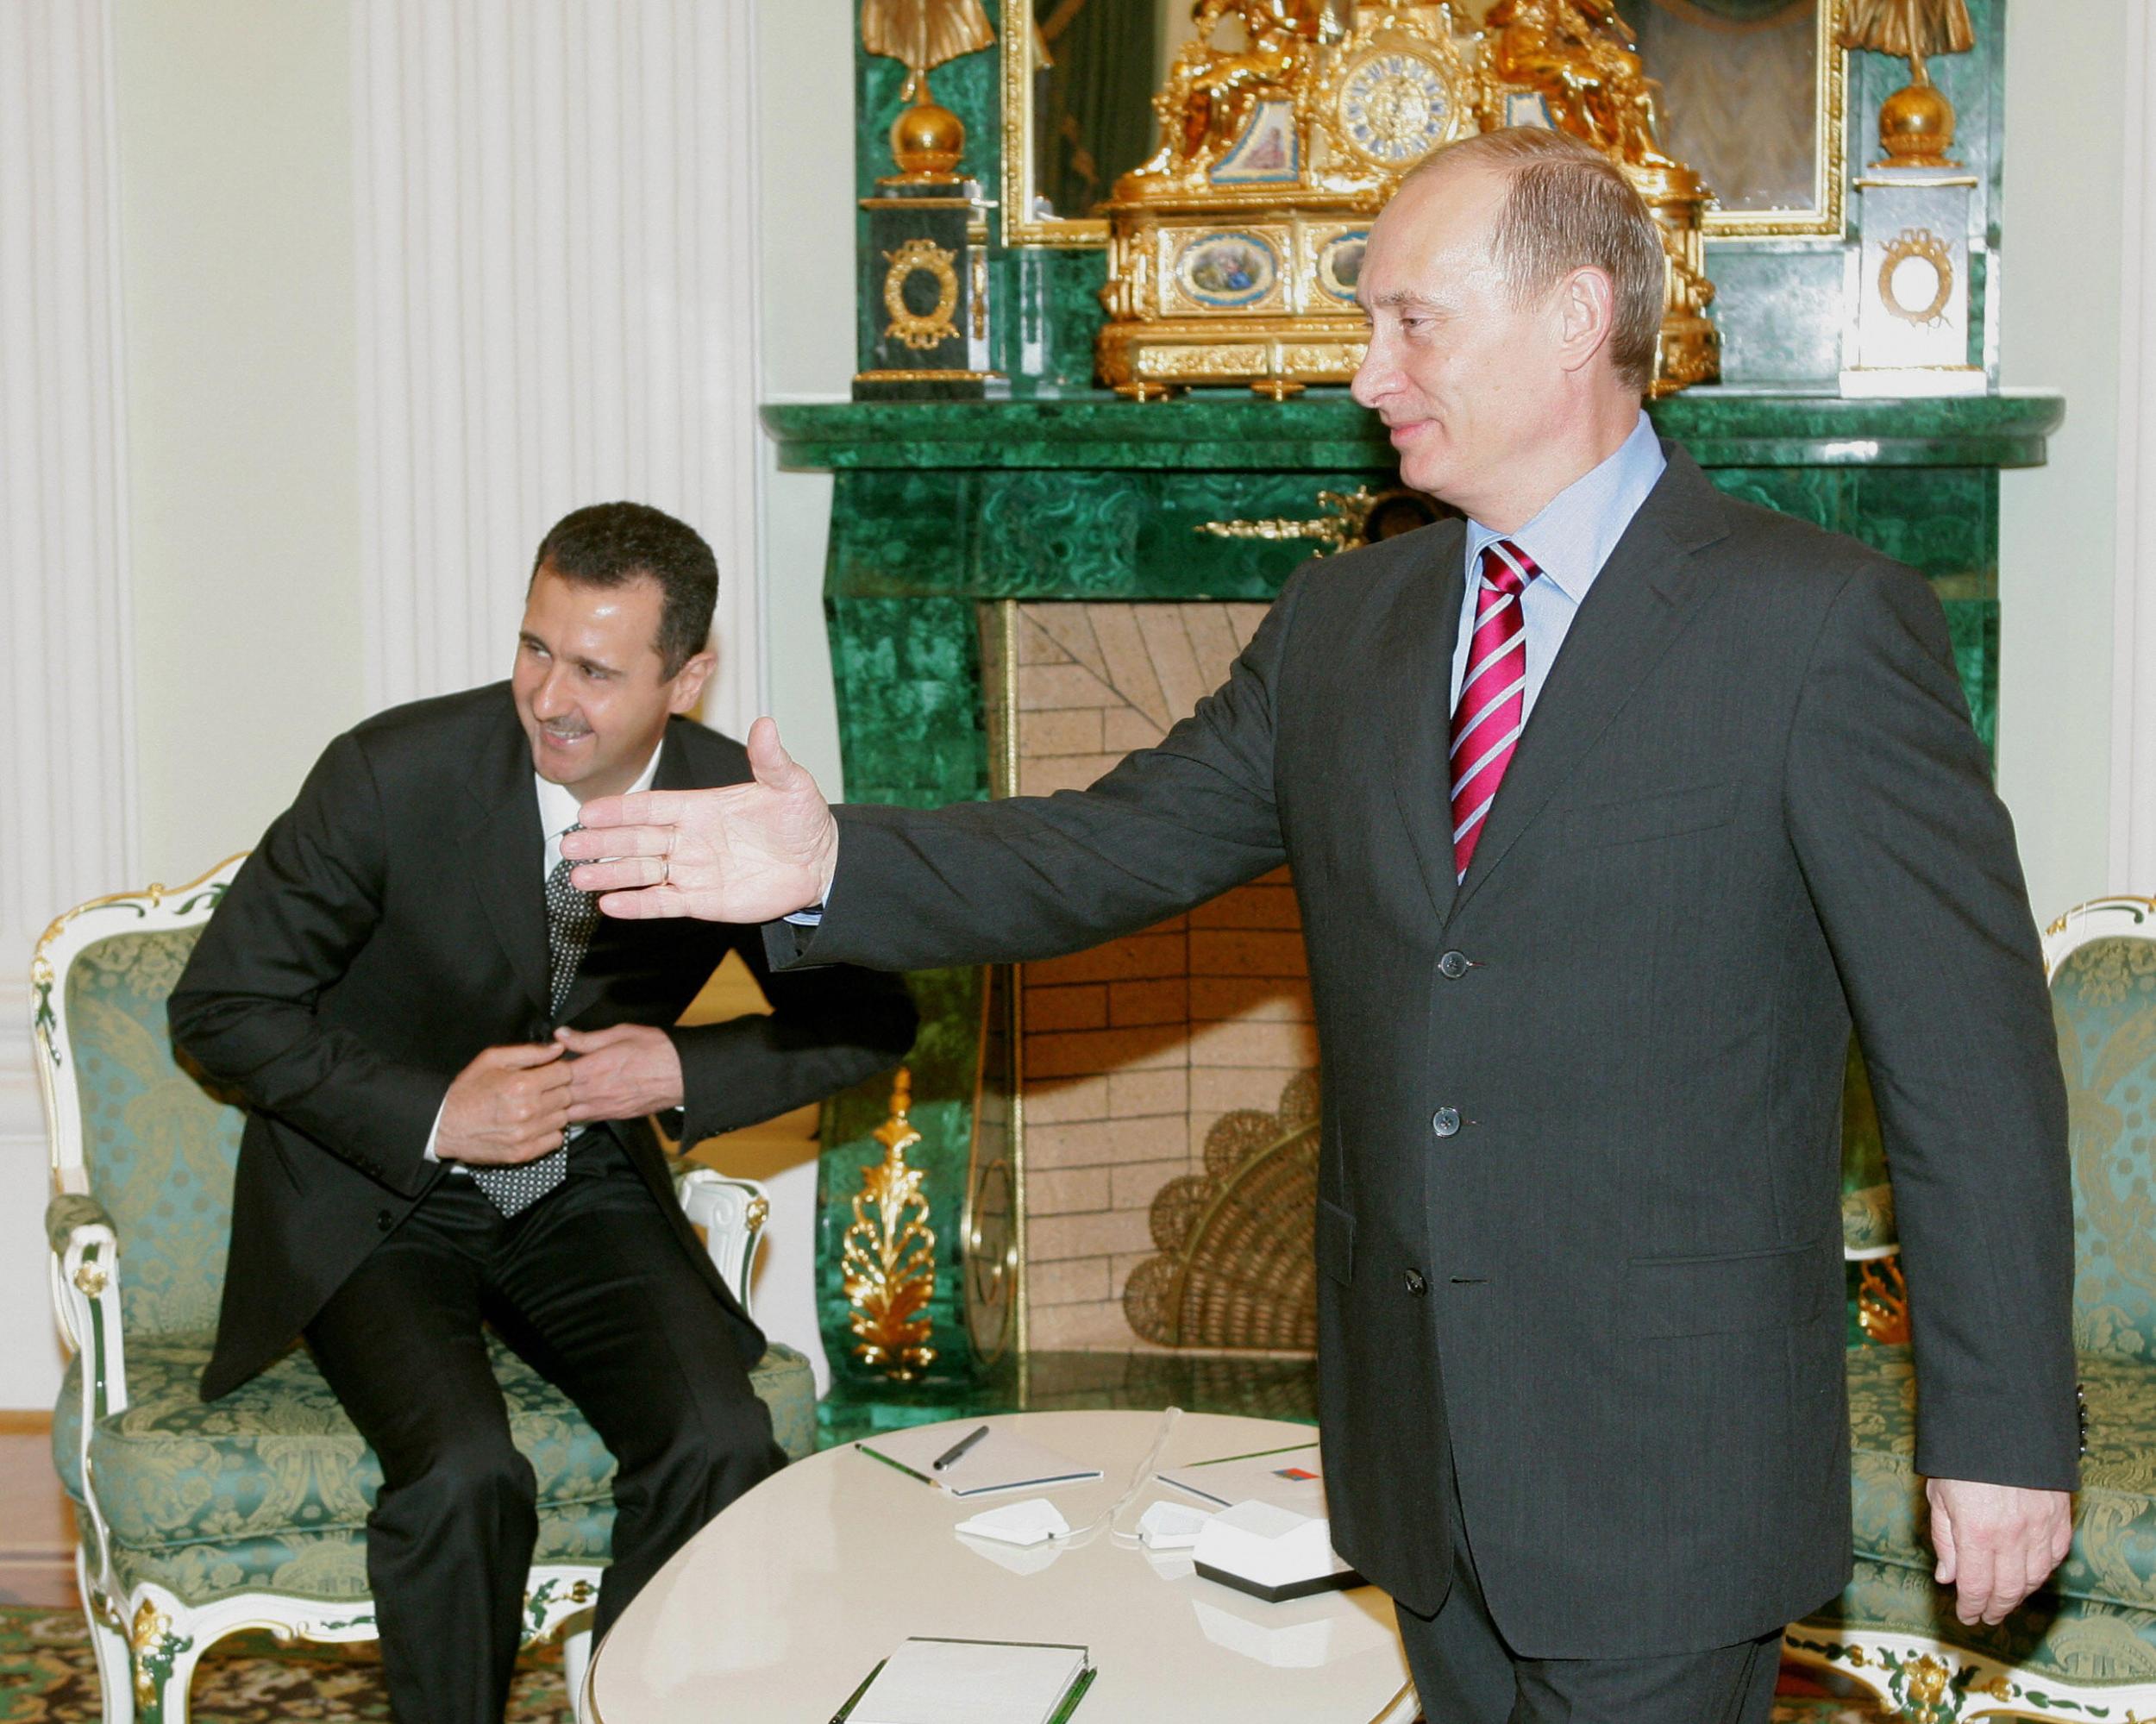 Vladimir Putin (right) said that although he considers the idea premature, he would be happy to offer Bashar al-Assad (left) asylum in Russia